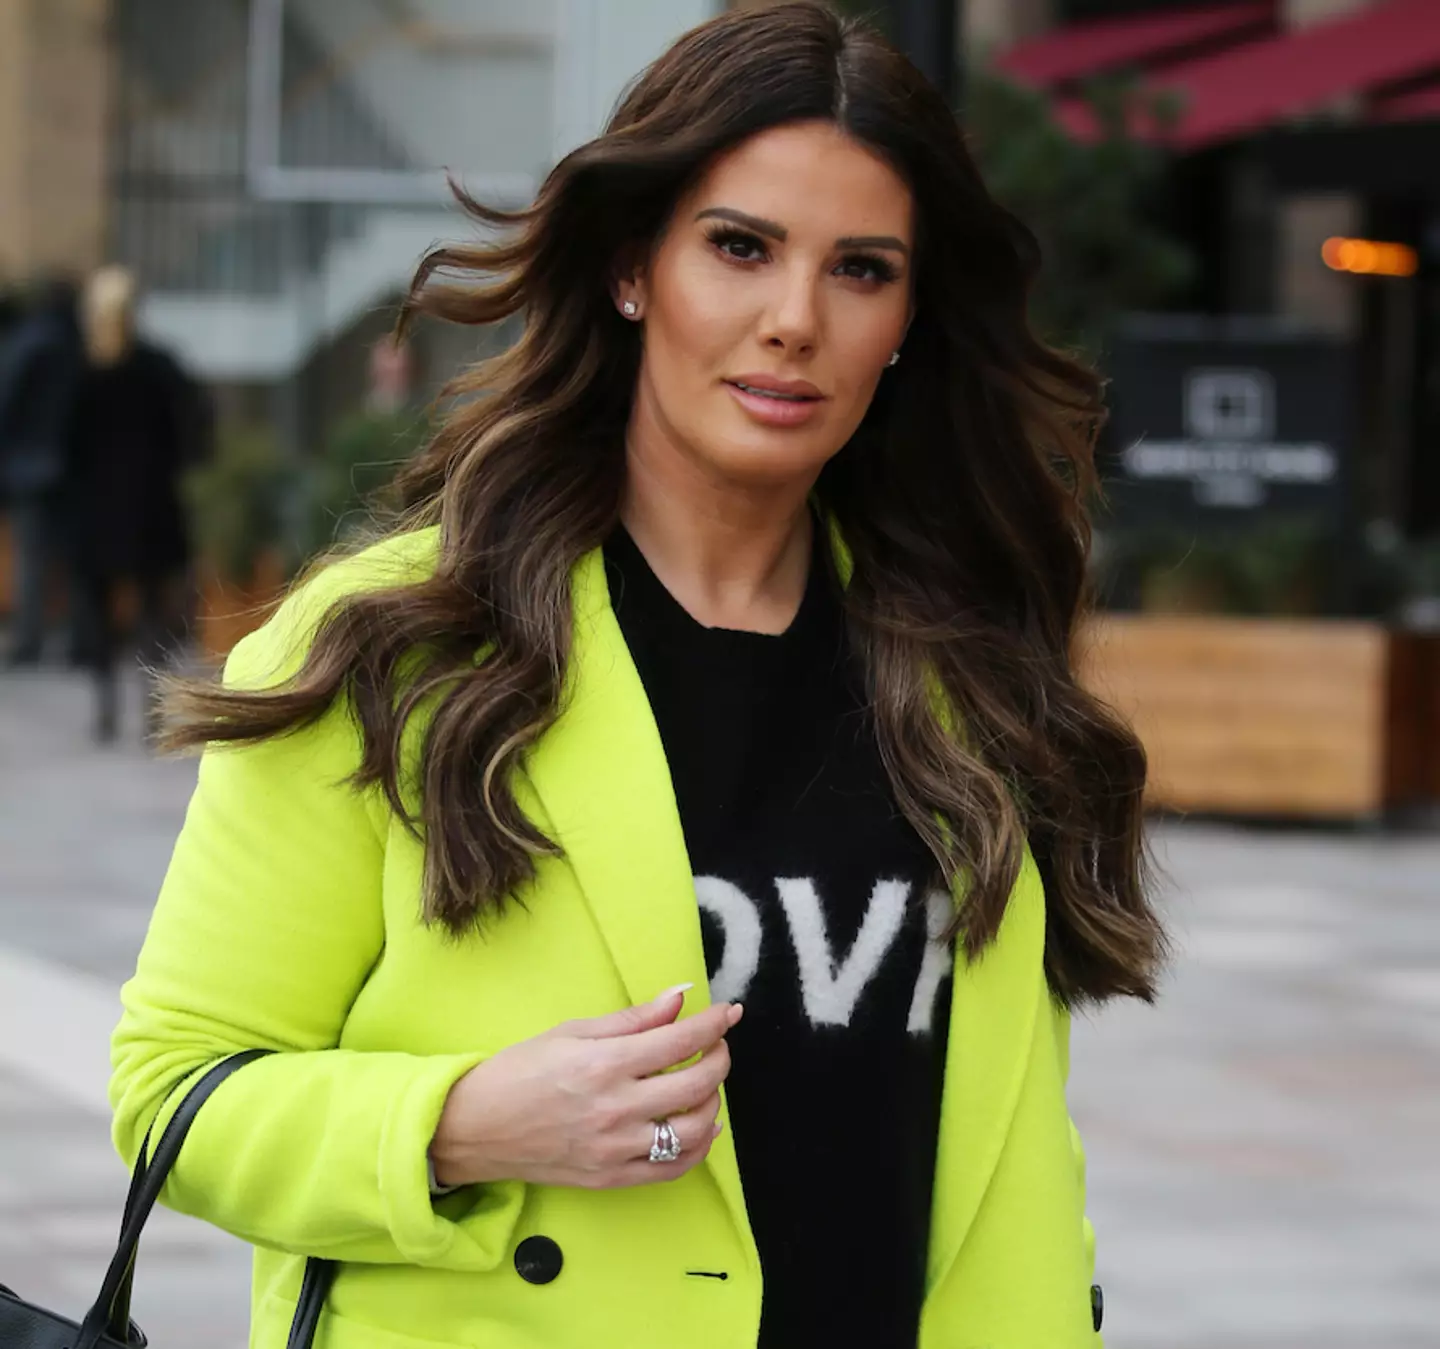 Rebekah Vardy has claimed she was "forced" to comment on Peter Andre's 'manhood'. (